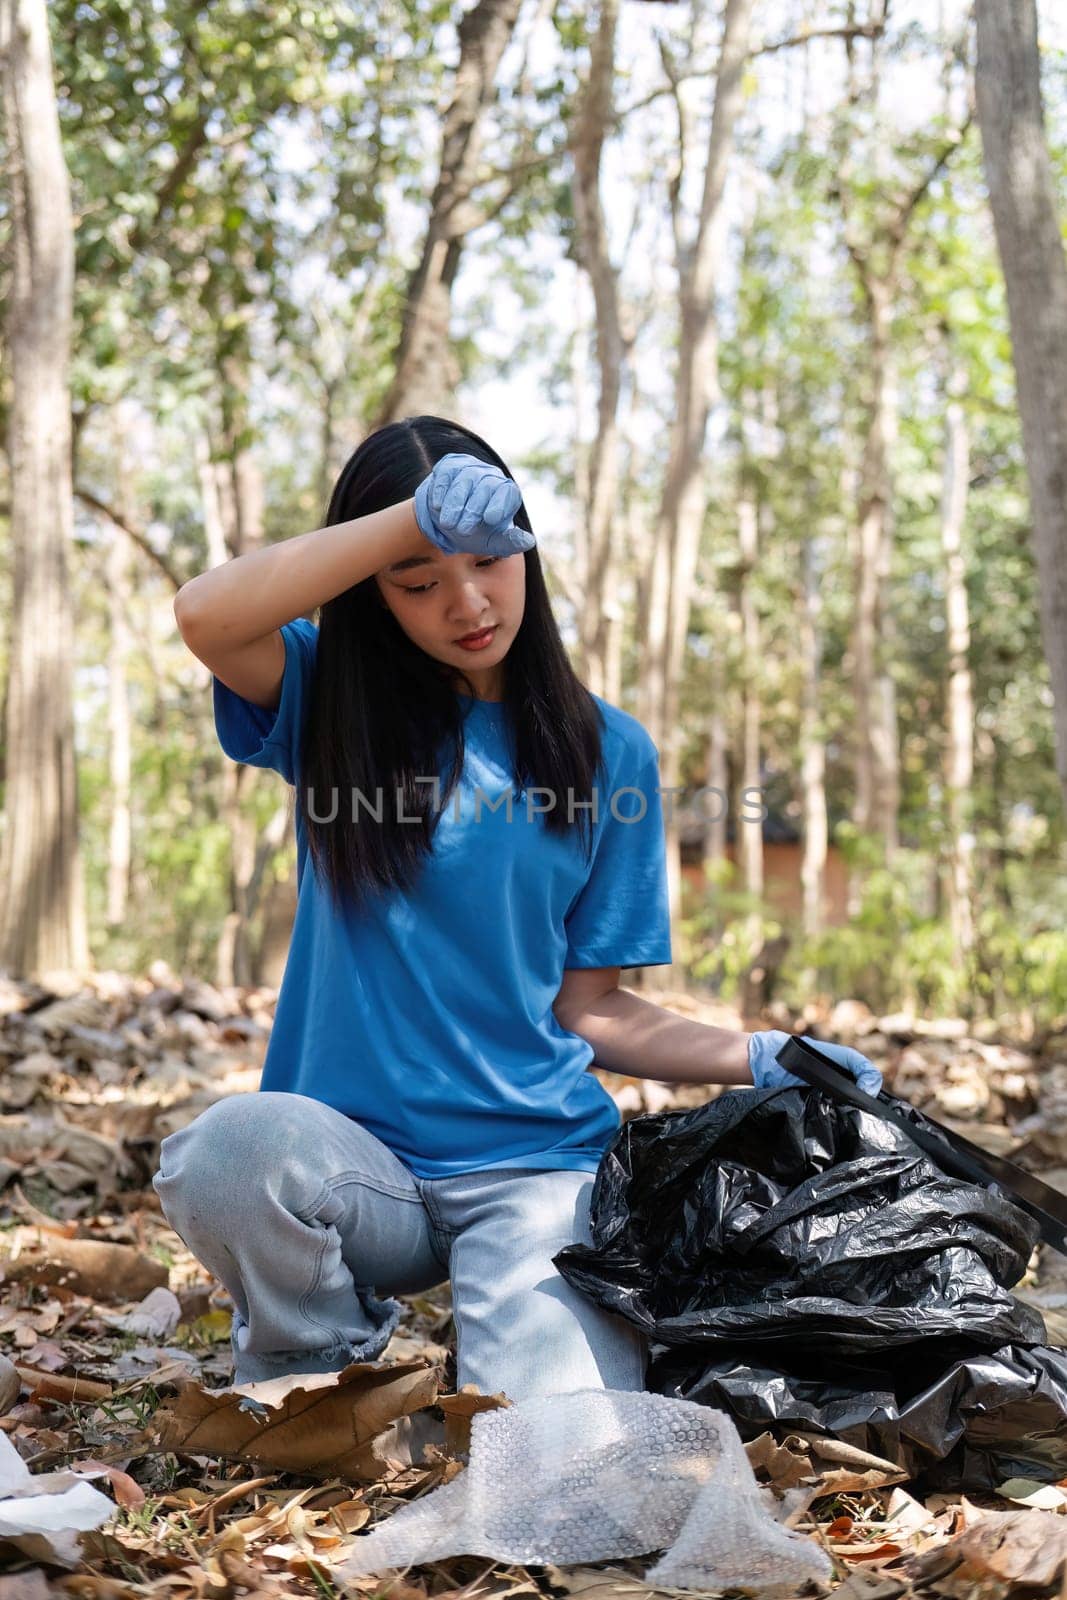 young woman holds a garbage bag and a group of Asian volunteers collect garbage in plastic bags and clean up